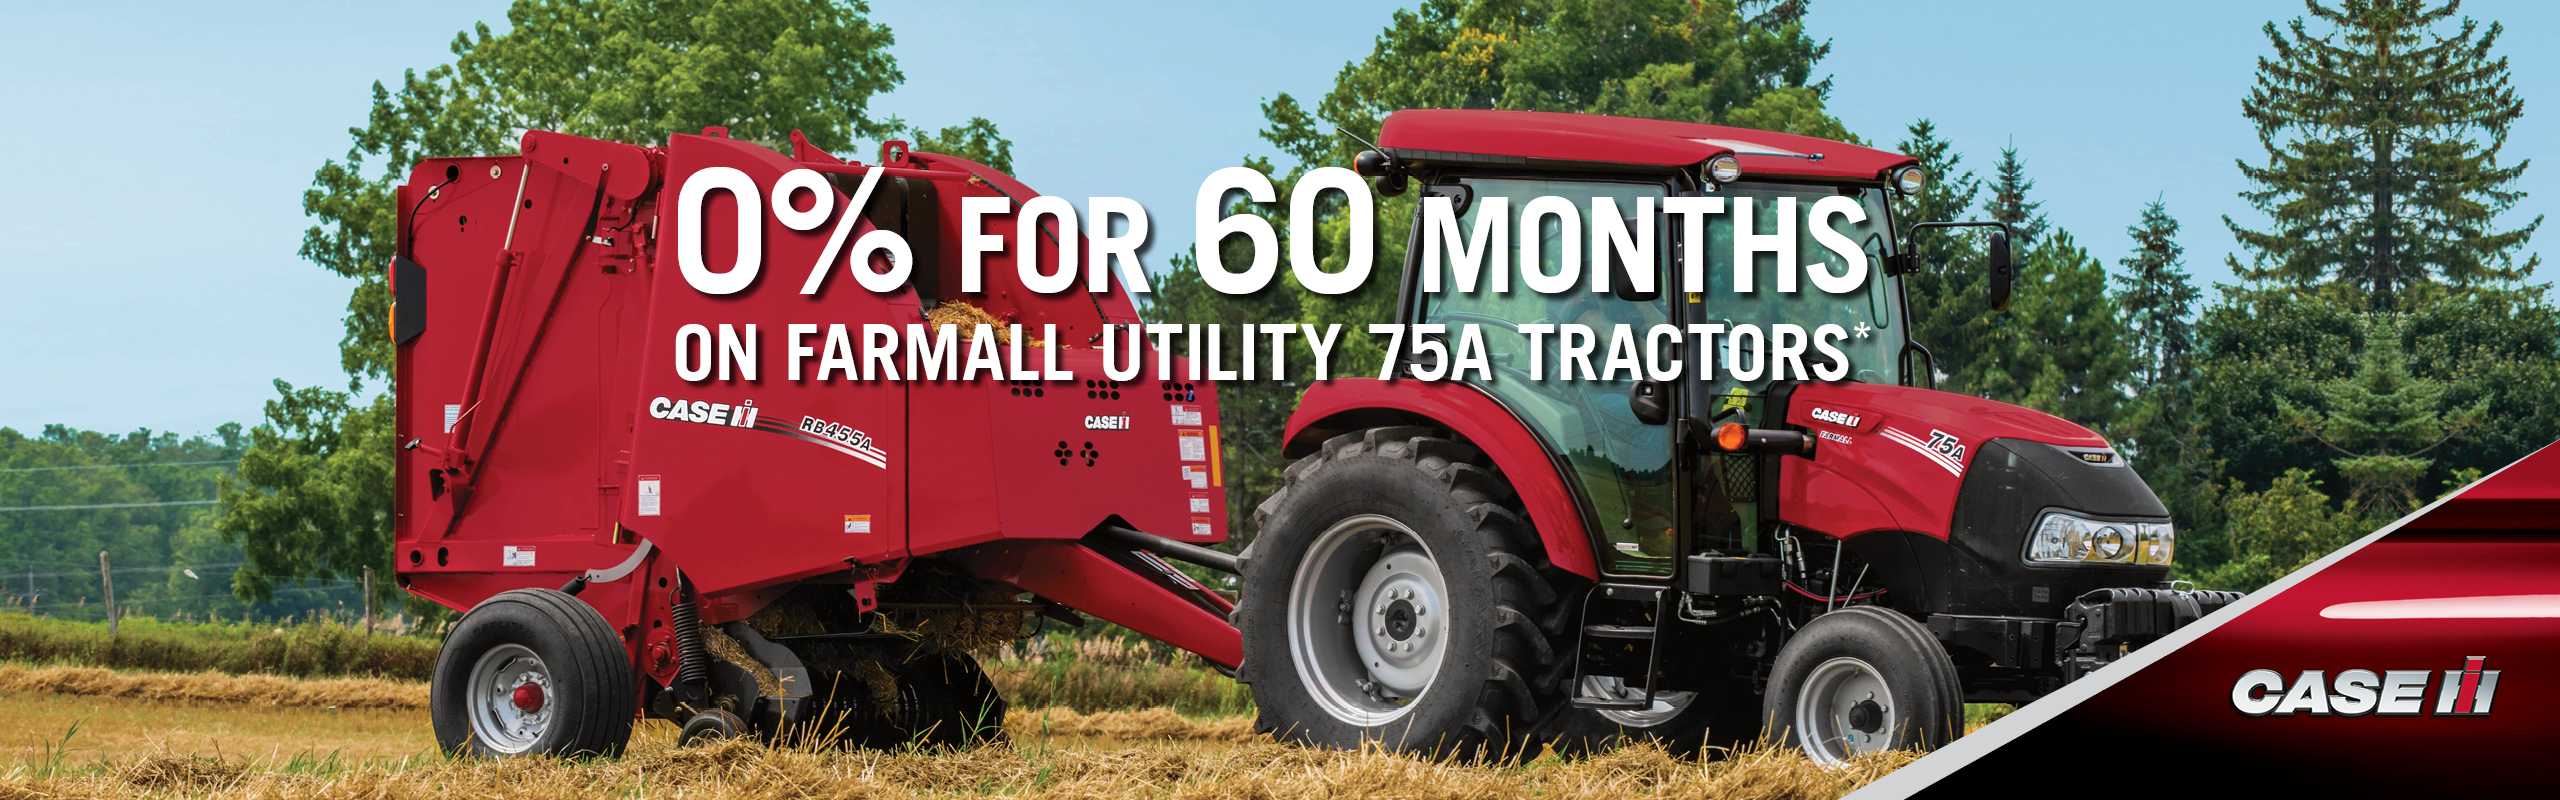 0% FOR 60 MONTHS ON FARMALL UTILITY 75A TRACTORS*